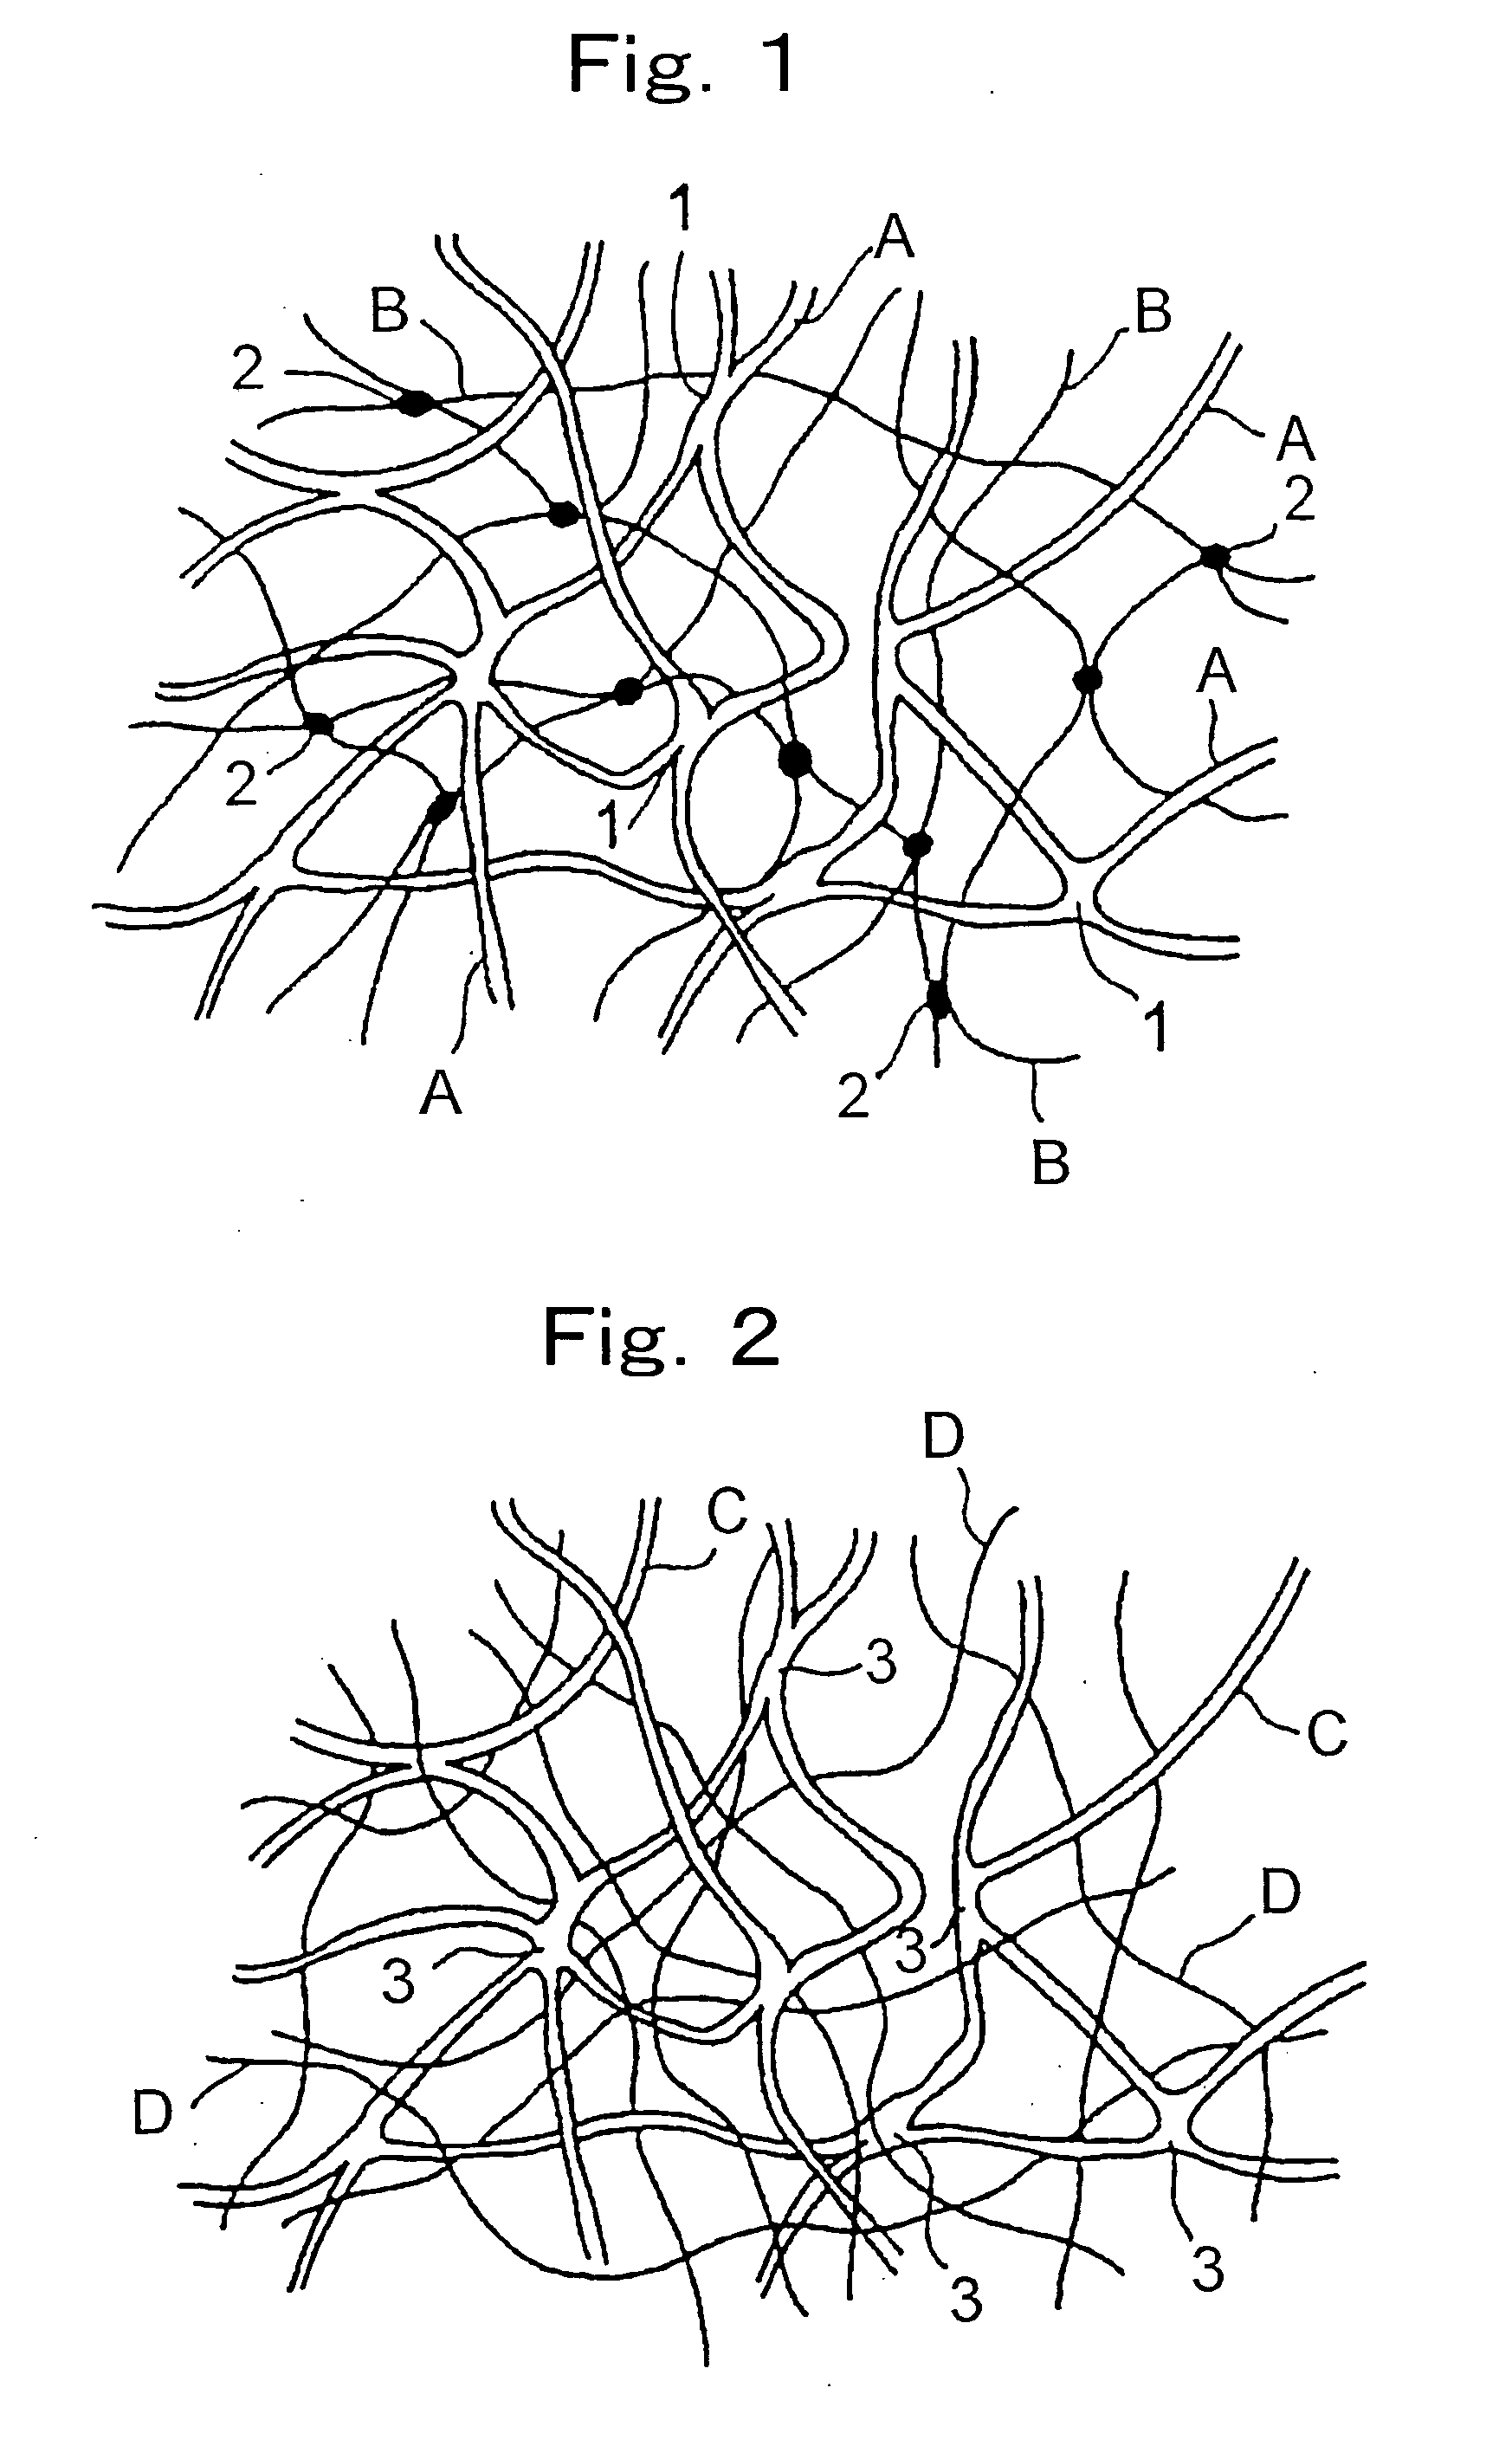 Hydrogel of (semi) interpenetrating network structure and process for producing the same